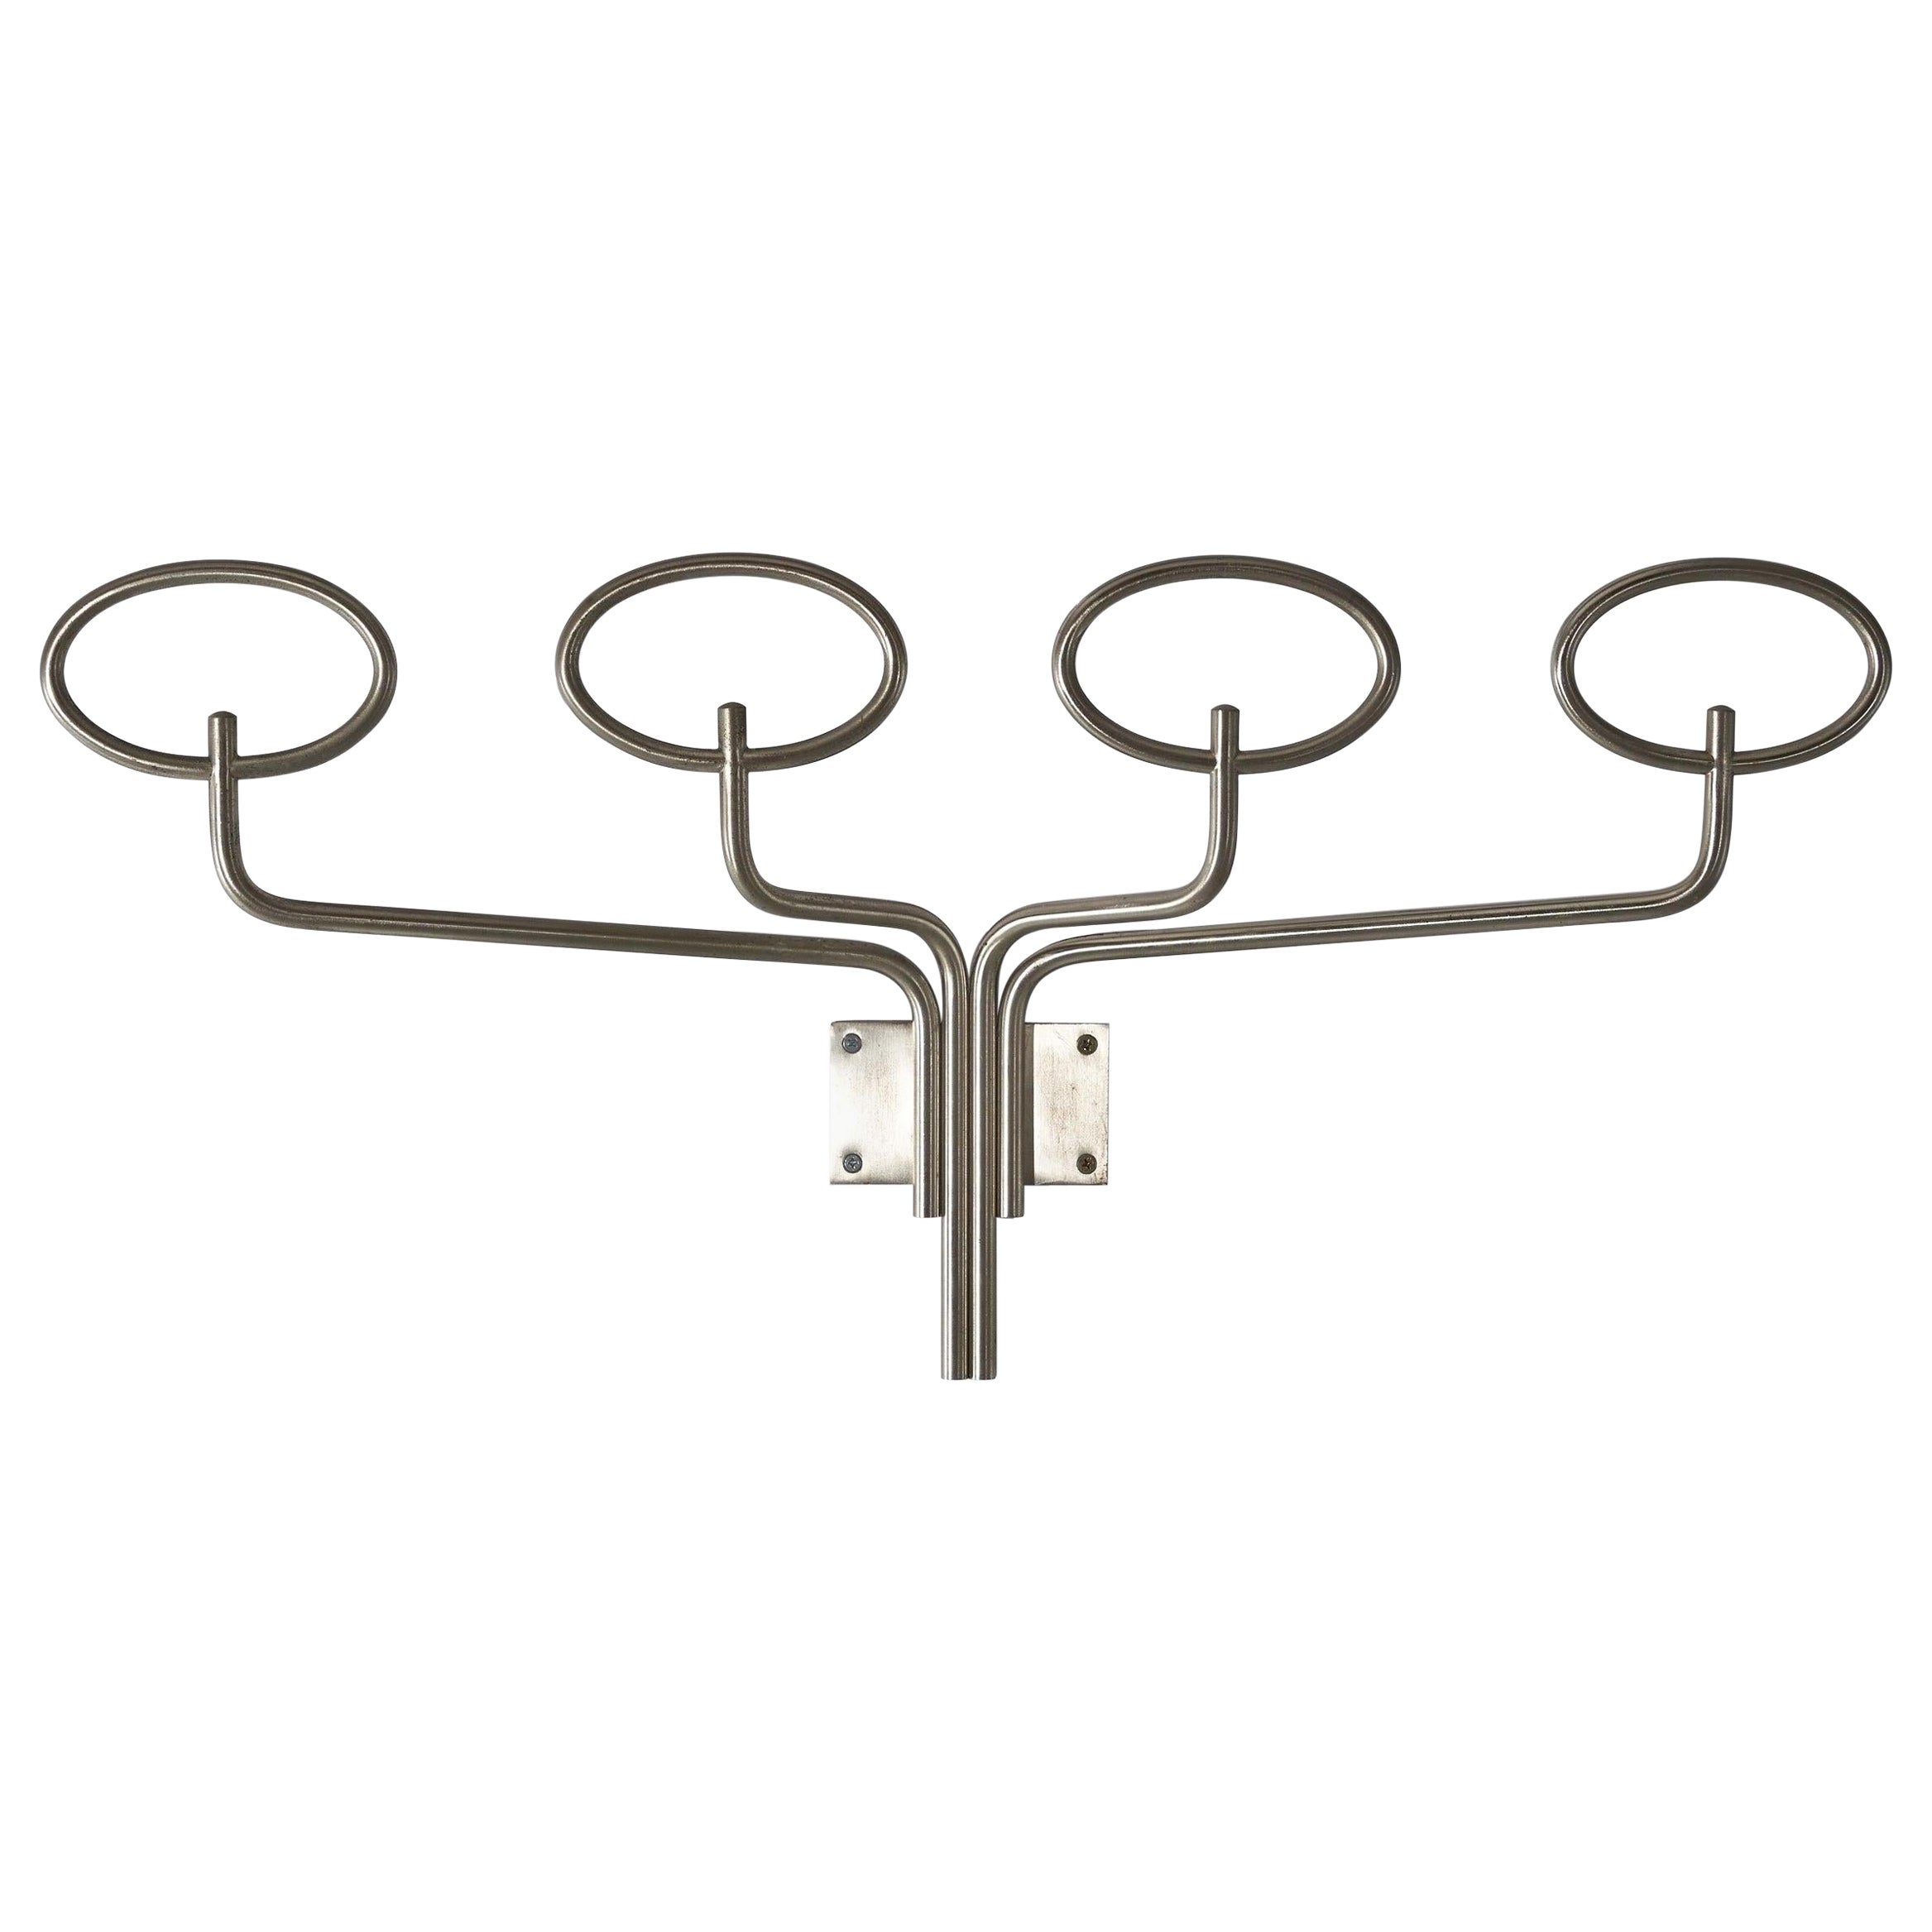 G. Gramigna and S. Mazza, Coat Rack, Nickel-Plated Metal, Artemide, Italy, 1960s For Sale